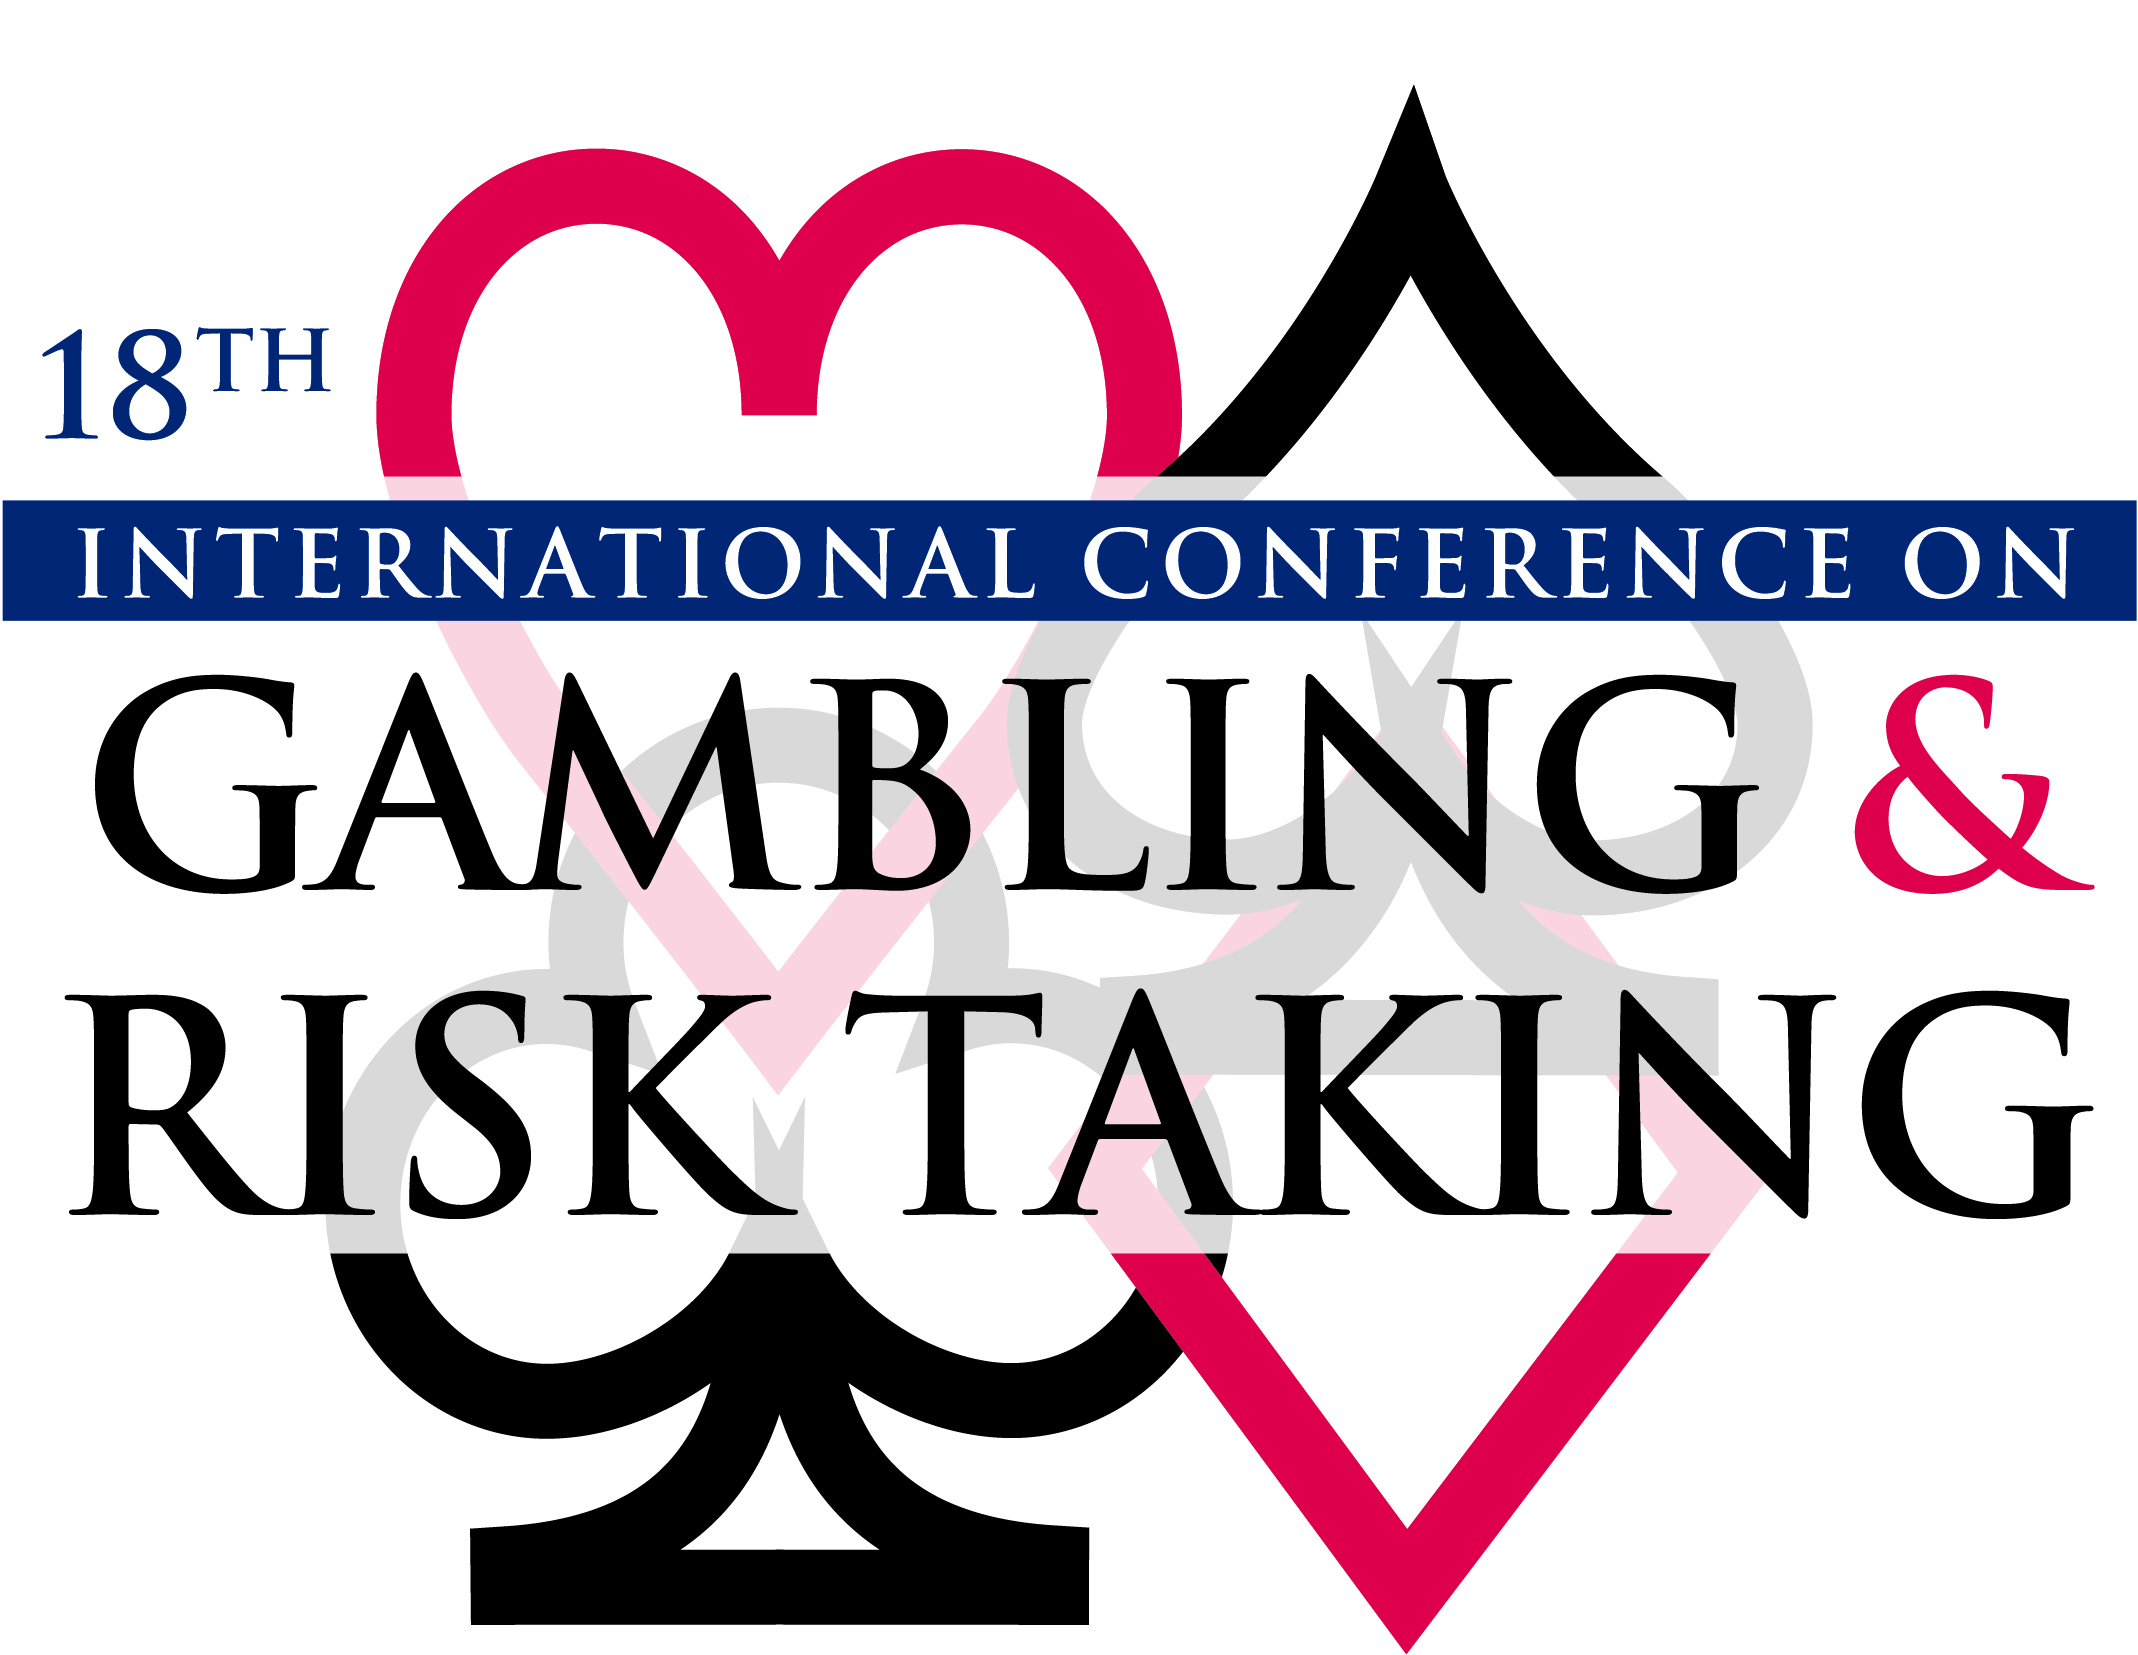 18th International Conference on Gambling and Risk Taking